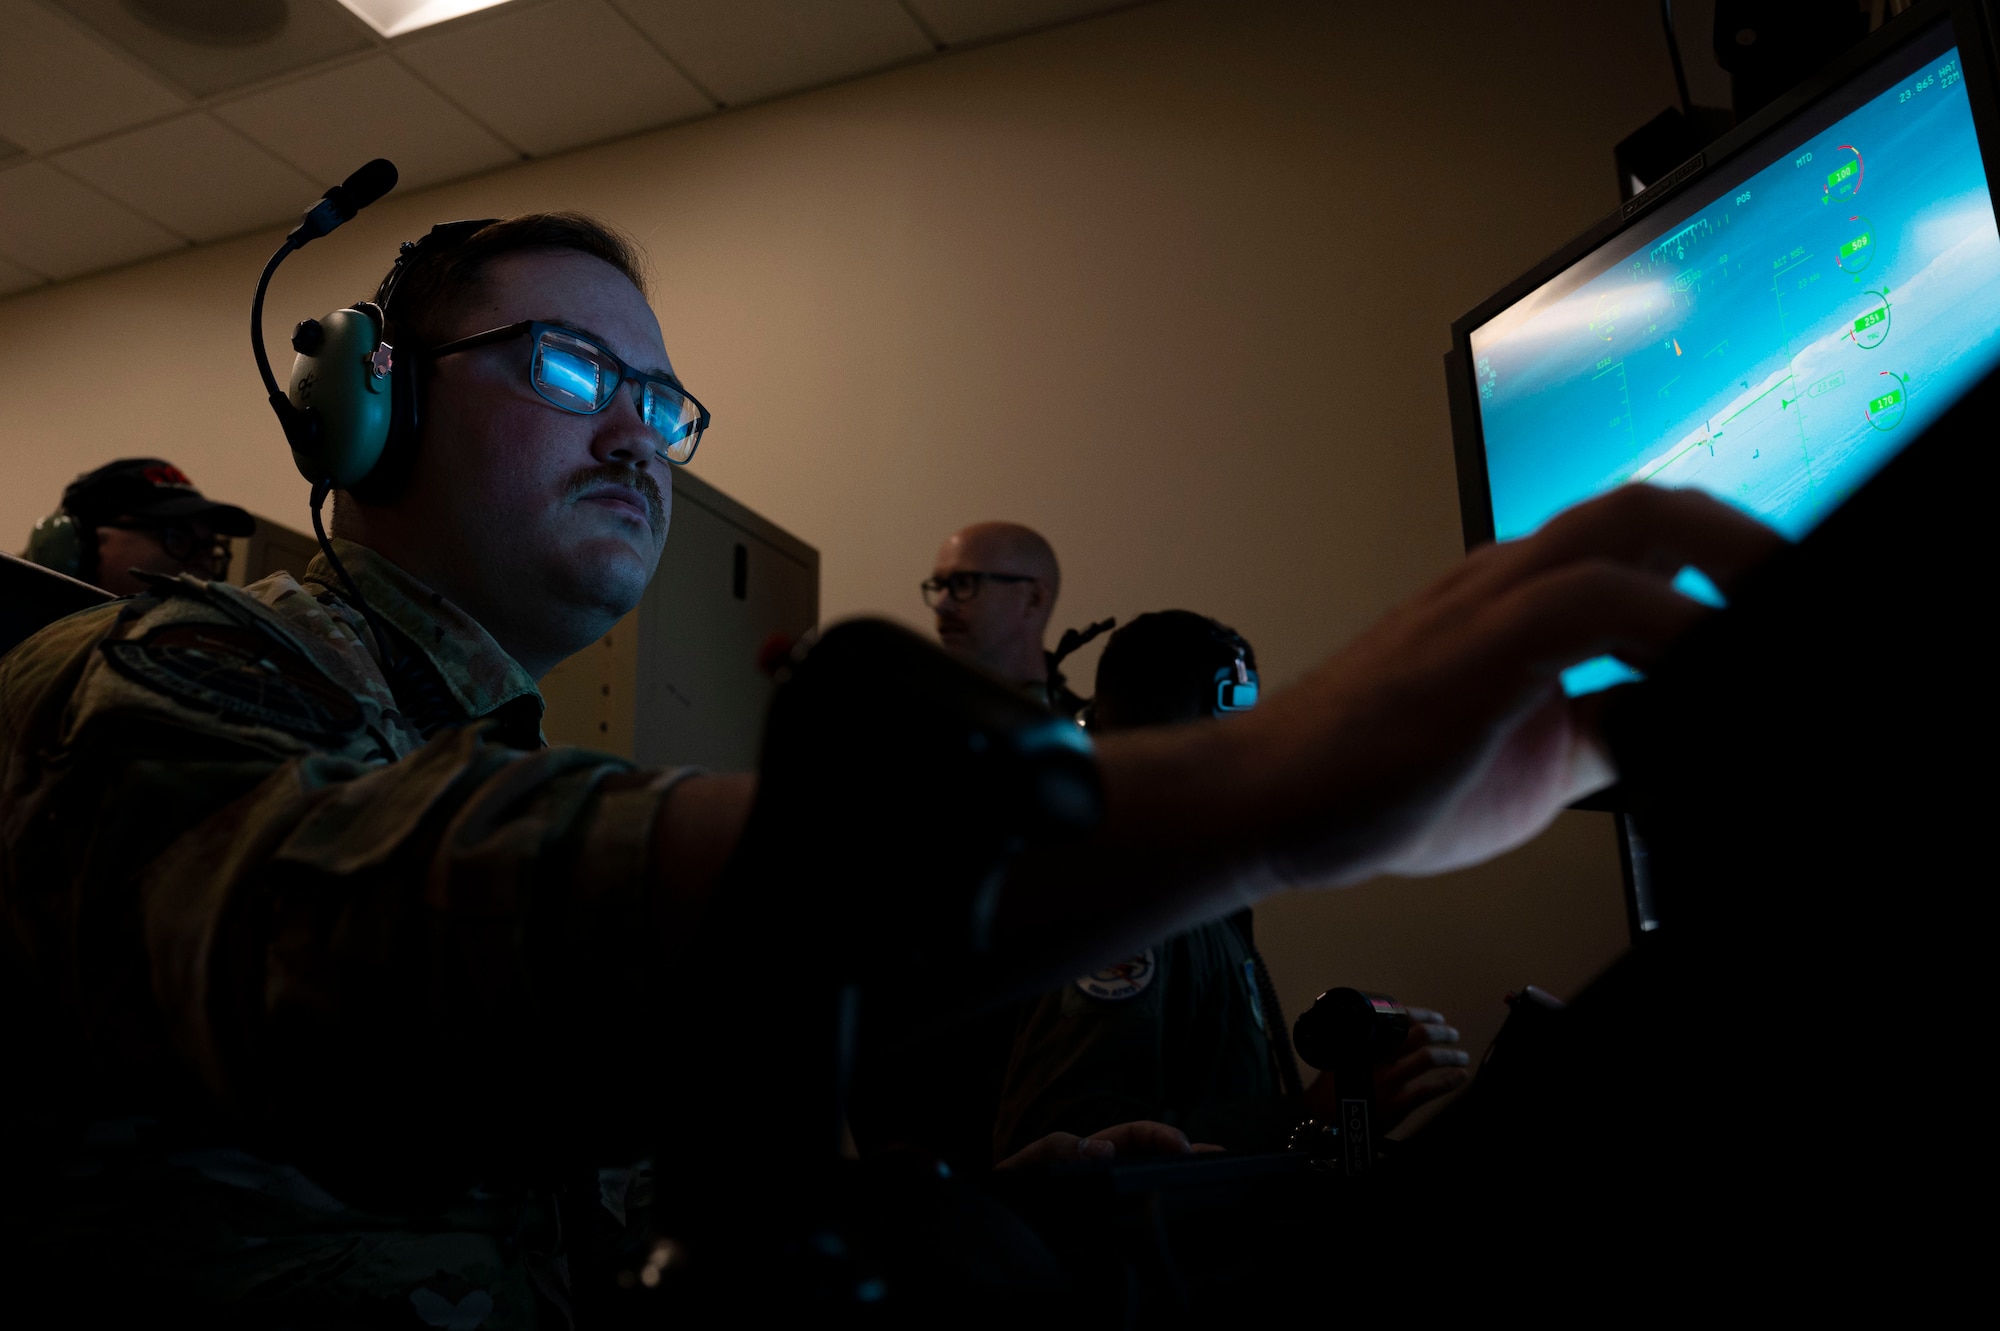 U.S. Air Force Staff Sgt. Jacob Barner, 491st Attack Squadron MQ-9 Reaper sensor operator technician, prepares to take control of a MQ-9 camera at Hancock Field Air National Guard Base, New York, June 22, 2023. The 491st ATKS is composed of both active duty and Air National Guard personnel responsible for training student pilots and sensor operators on how to fly an MQ-9 Reaper. (U.S. Air Force photo by Airman 1st Class Isaiah Pedrazzini)